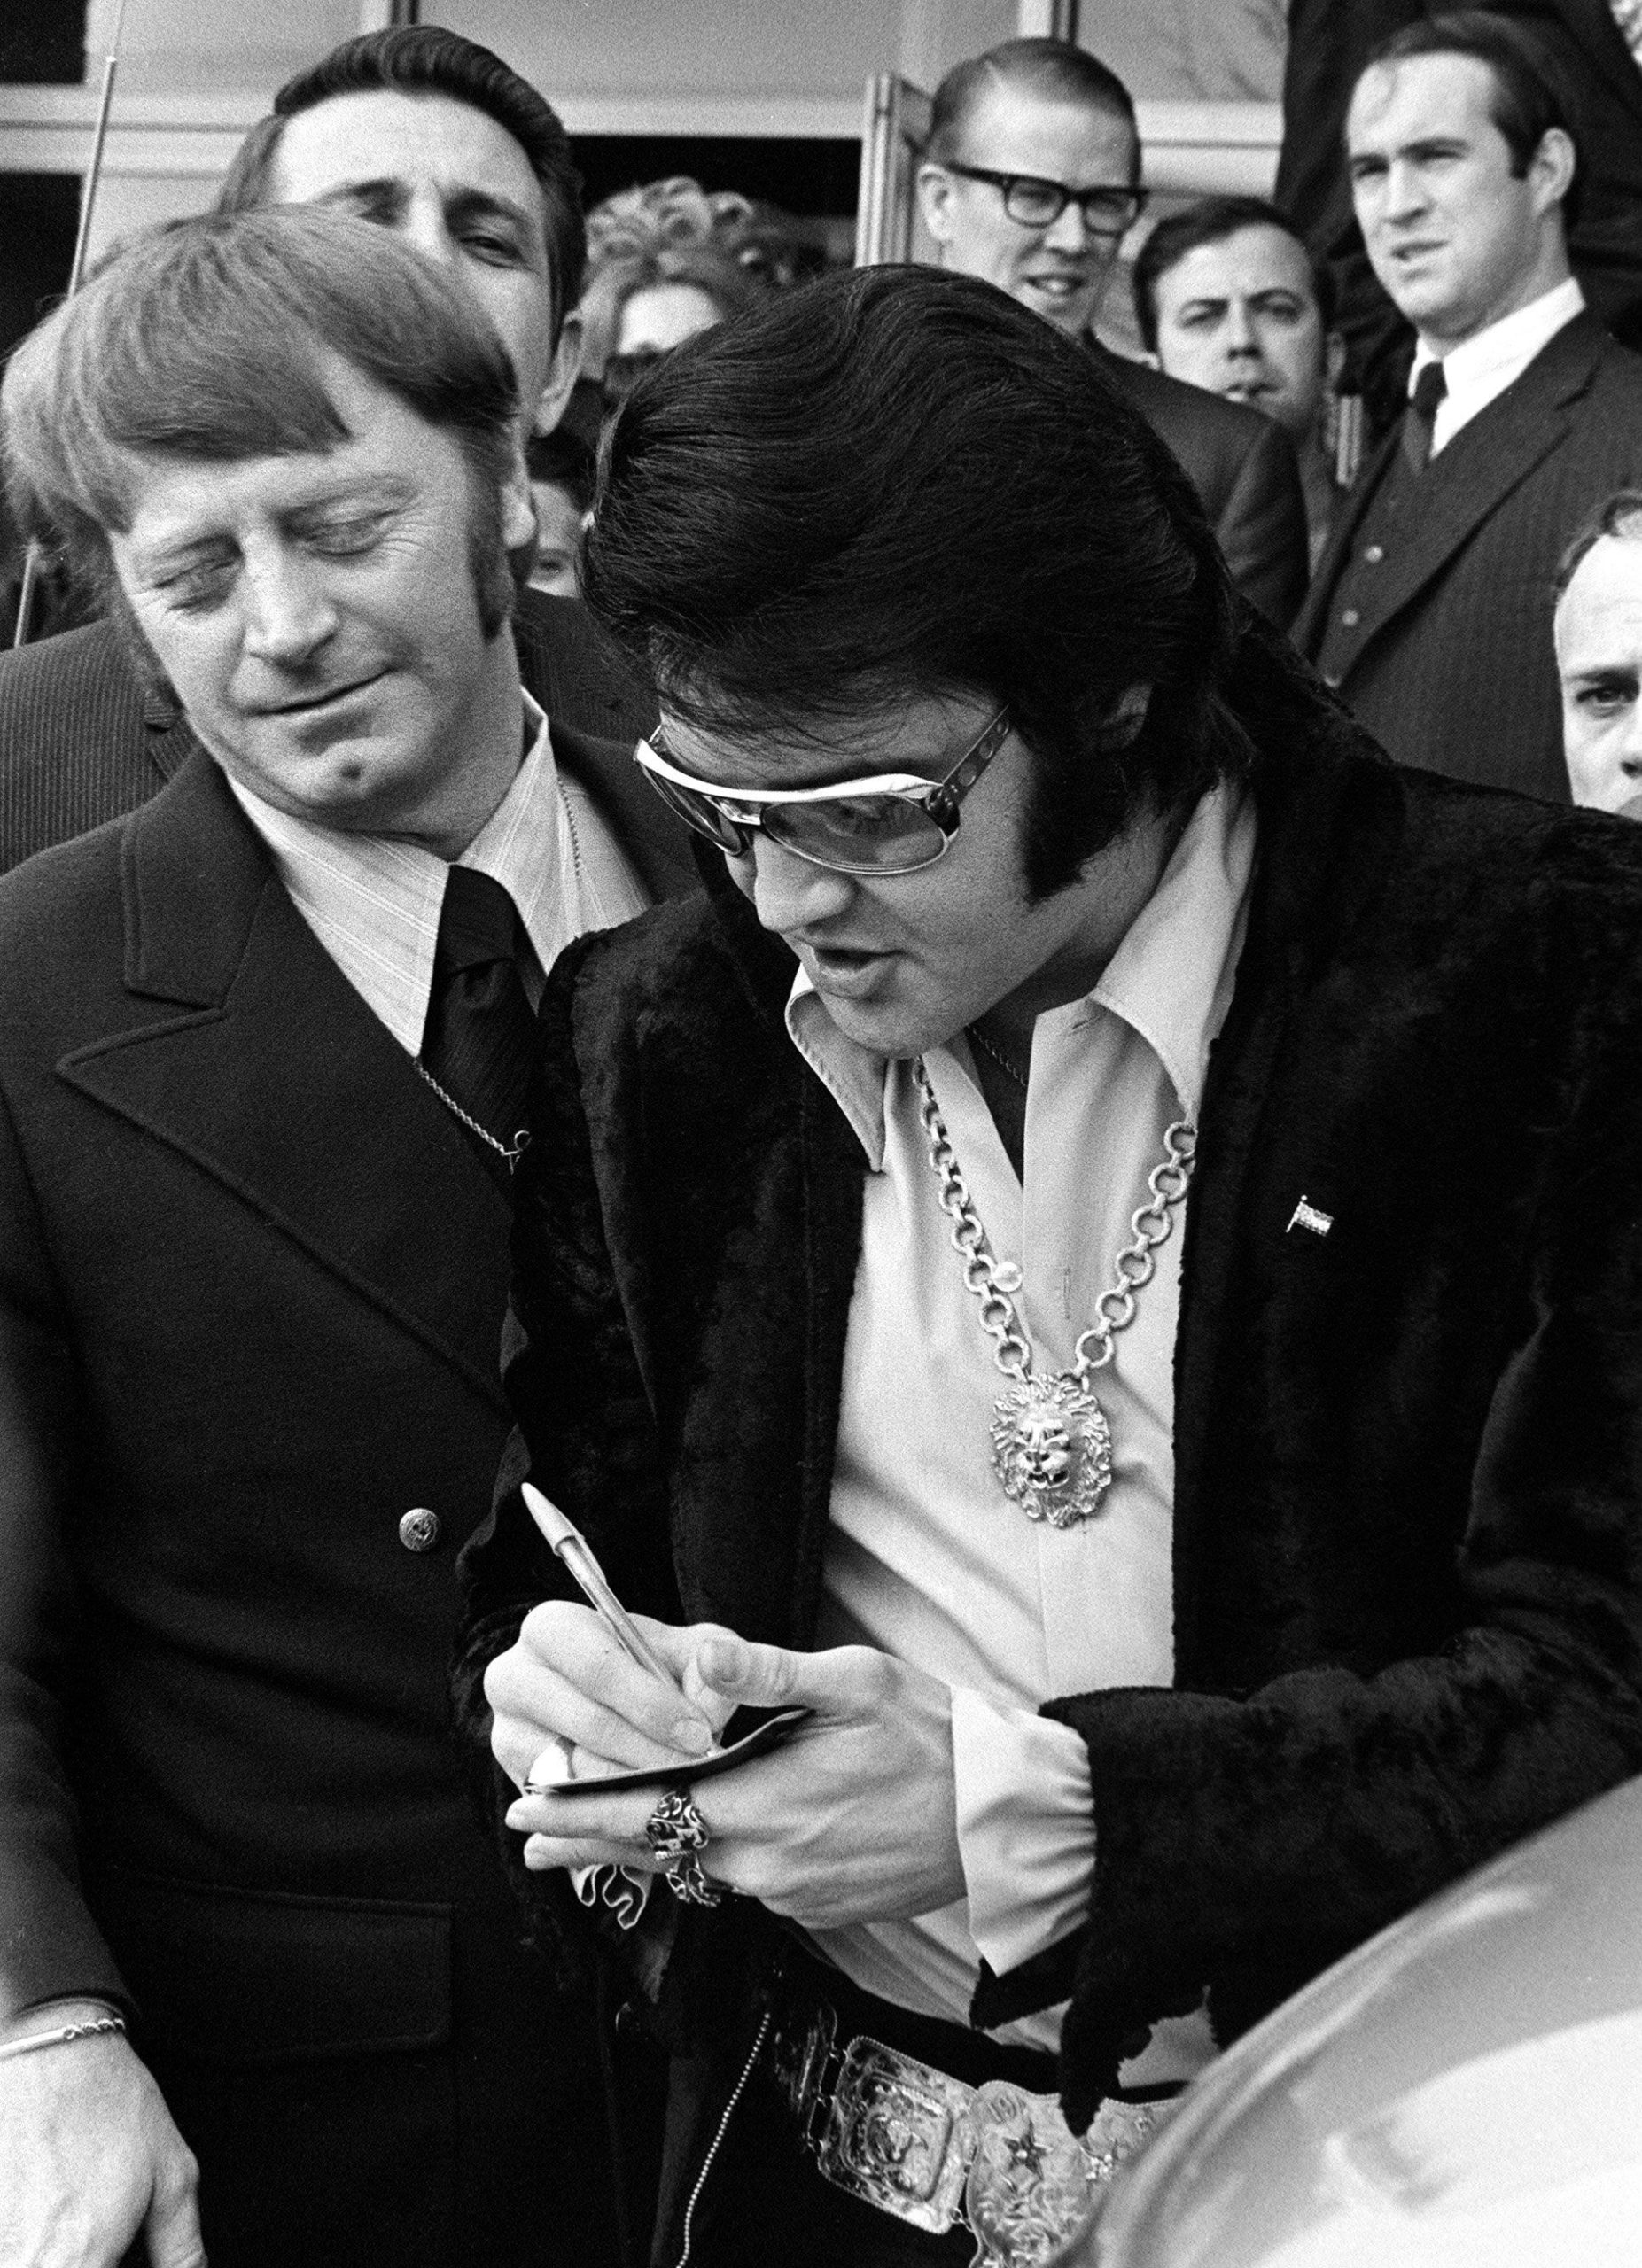 Elvis with bodyguards